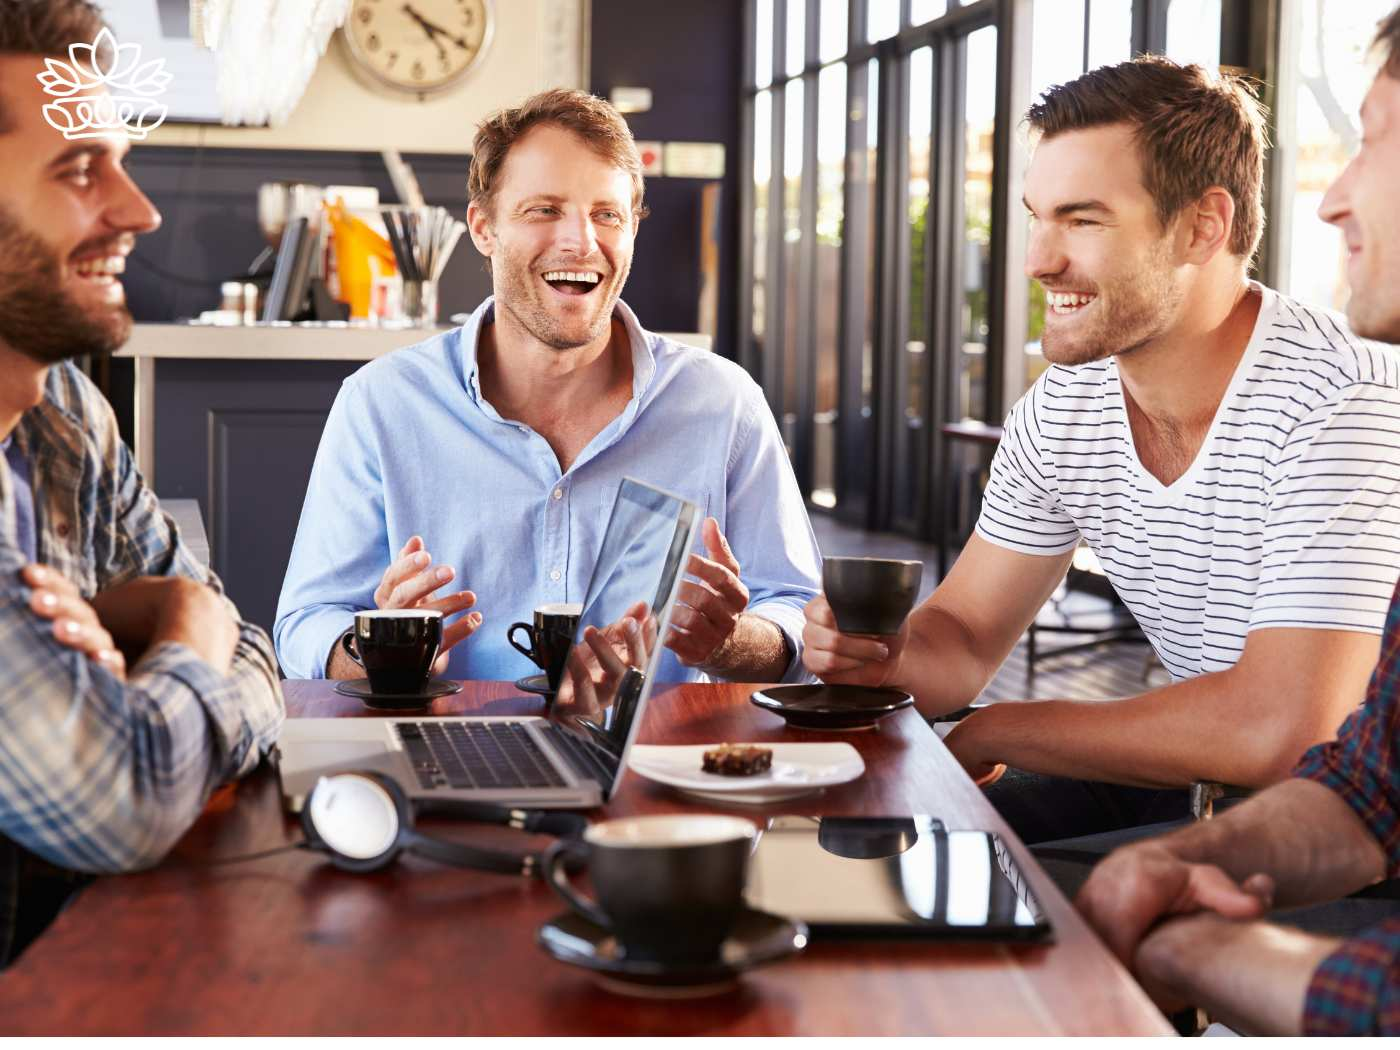 A group of men having a cheerful conversation over coffee, showcasing the Gift Boxes for Men Collection - One size fits all, perfect for any occasion, including items like a box and beer glass - Fabulous Flowers and Gifts